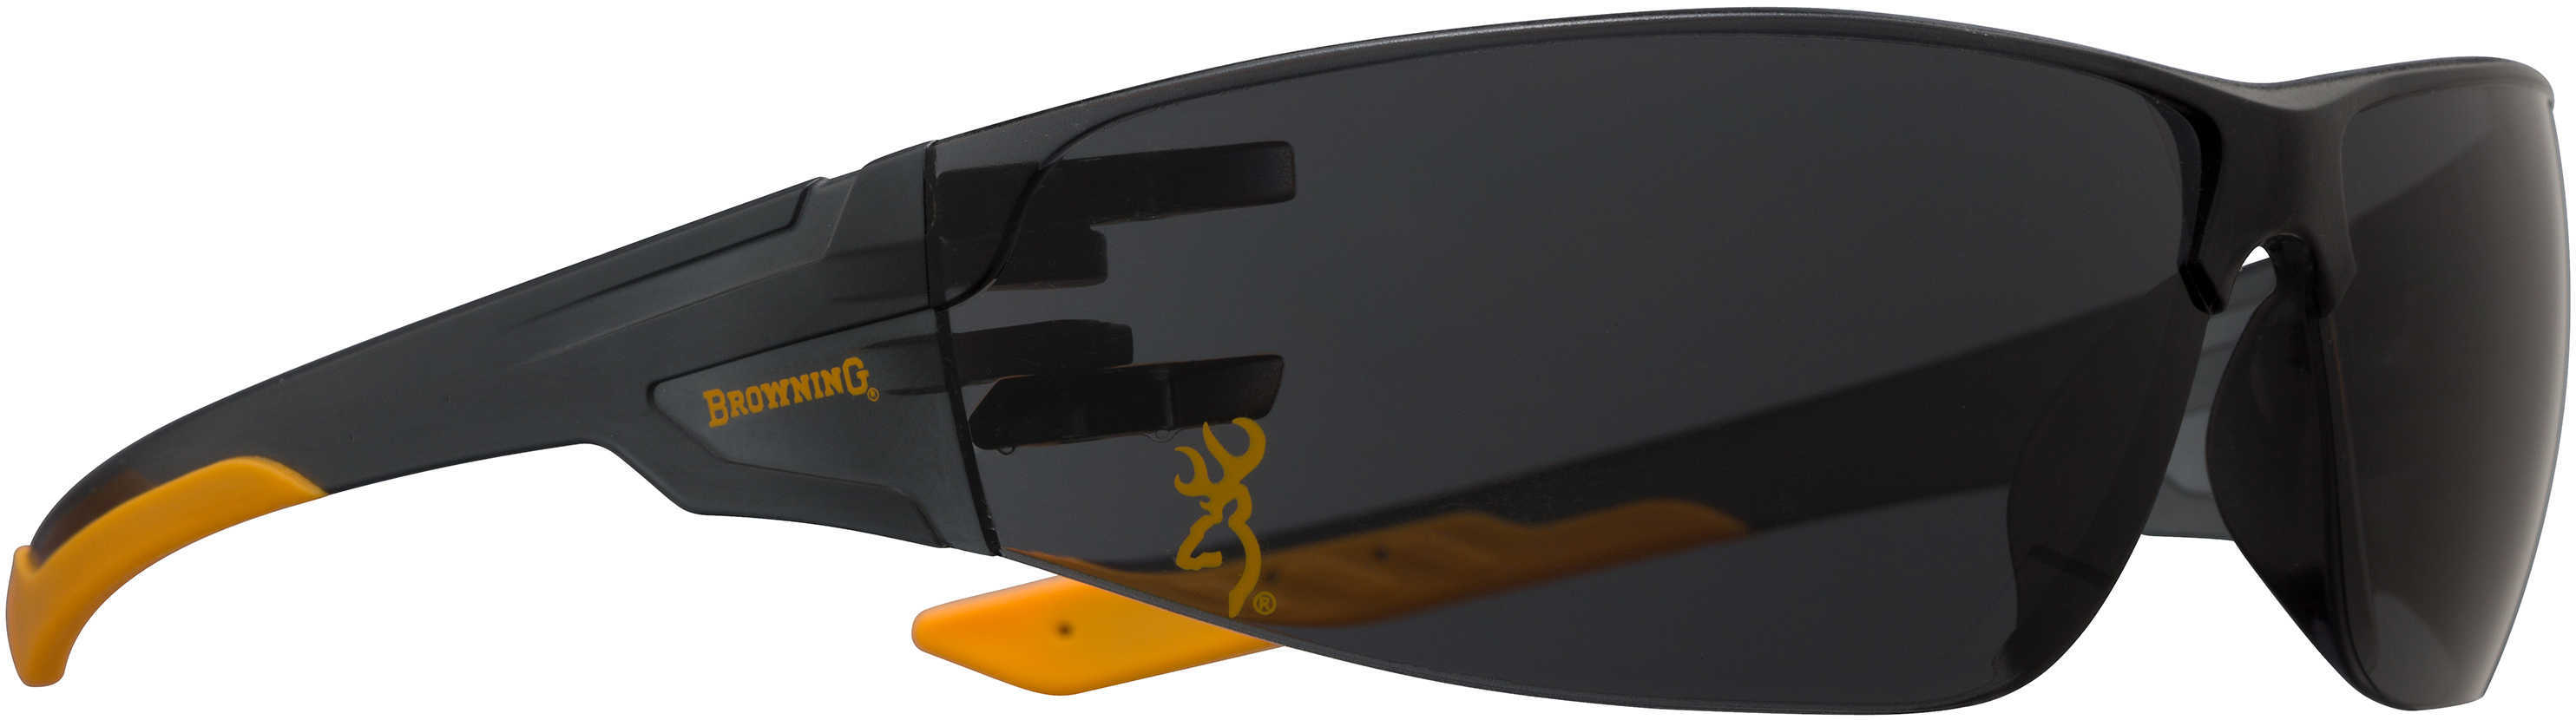 Browning 12762 Shooters Flex Glasses Eye Protection Smoke Lens/Gold Temple